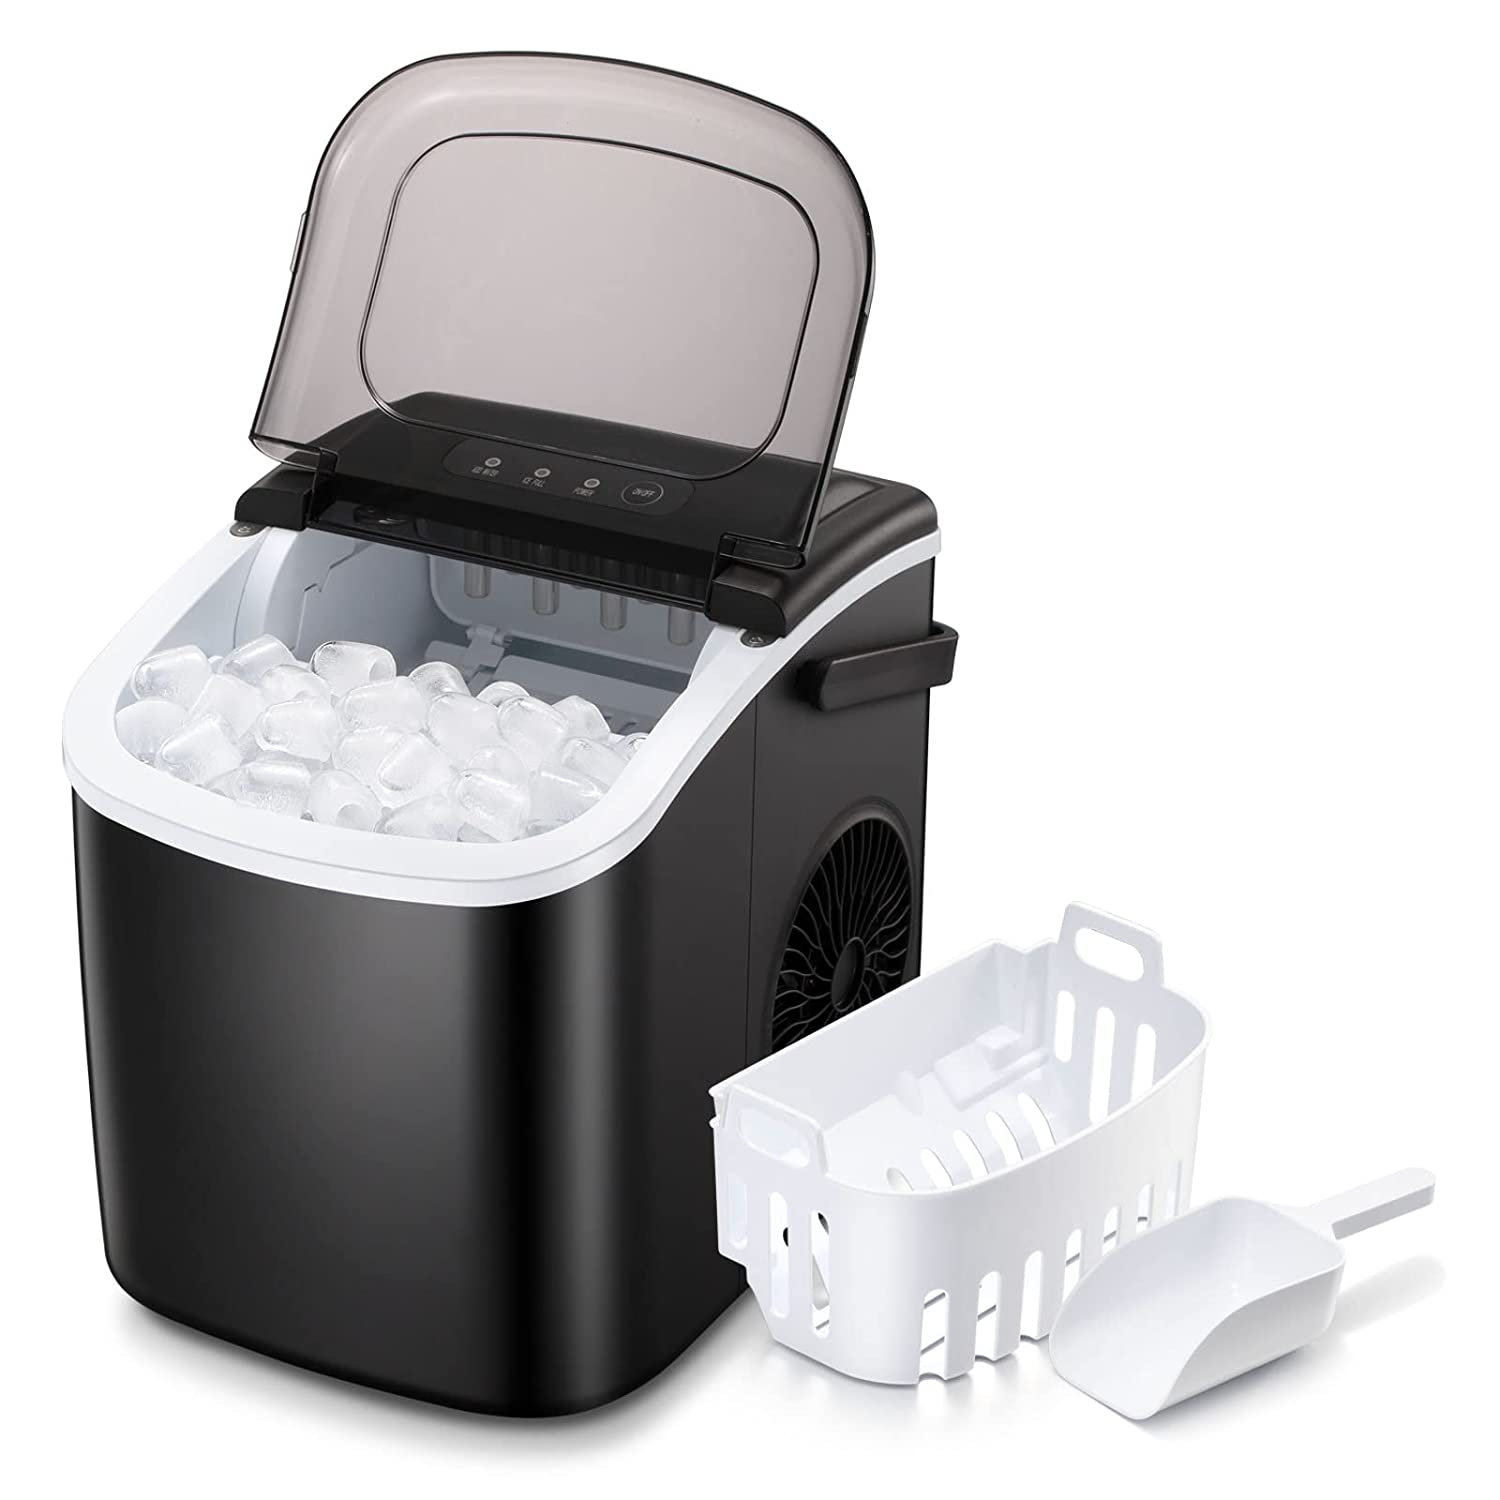 R.W.FLAME 26 lb. lb. Daily Production Bullet Ice Countertop Ice Maker, Self-Cleaning Ice Makers Finish: Black SZ58ZBJ12H